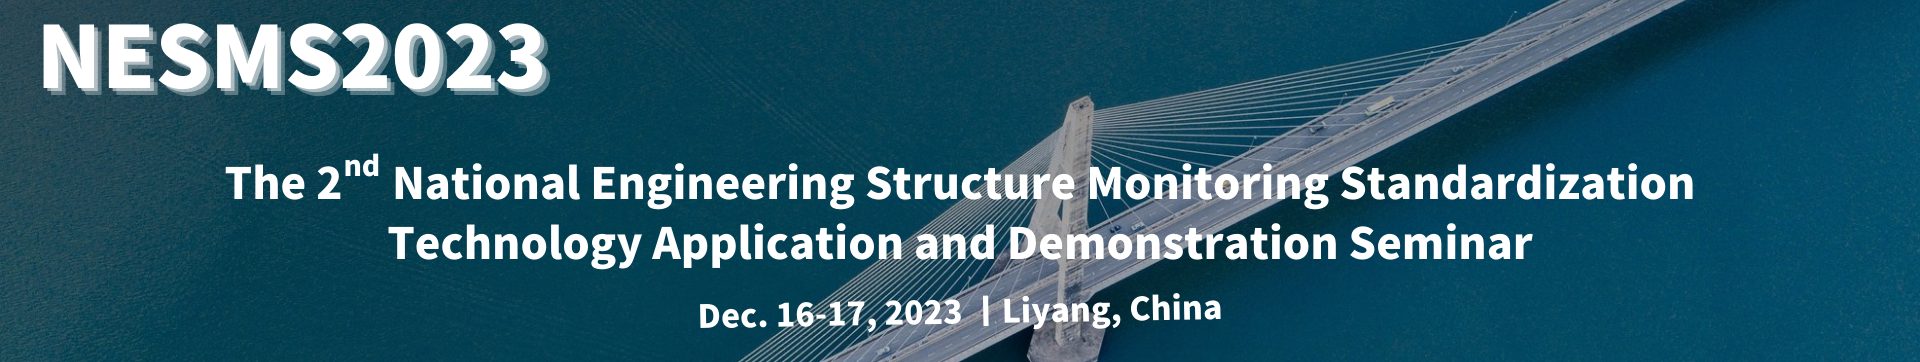 The 2nd National Engineering Structure Monitoring Standardization Technology Application and Demonstration Seminar